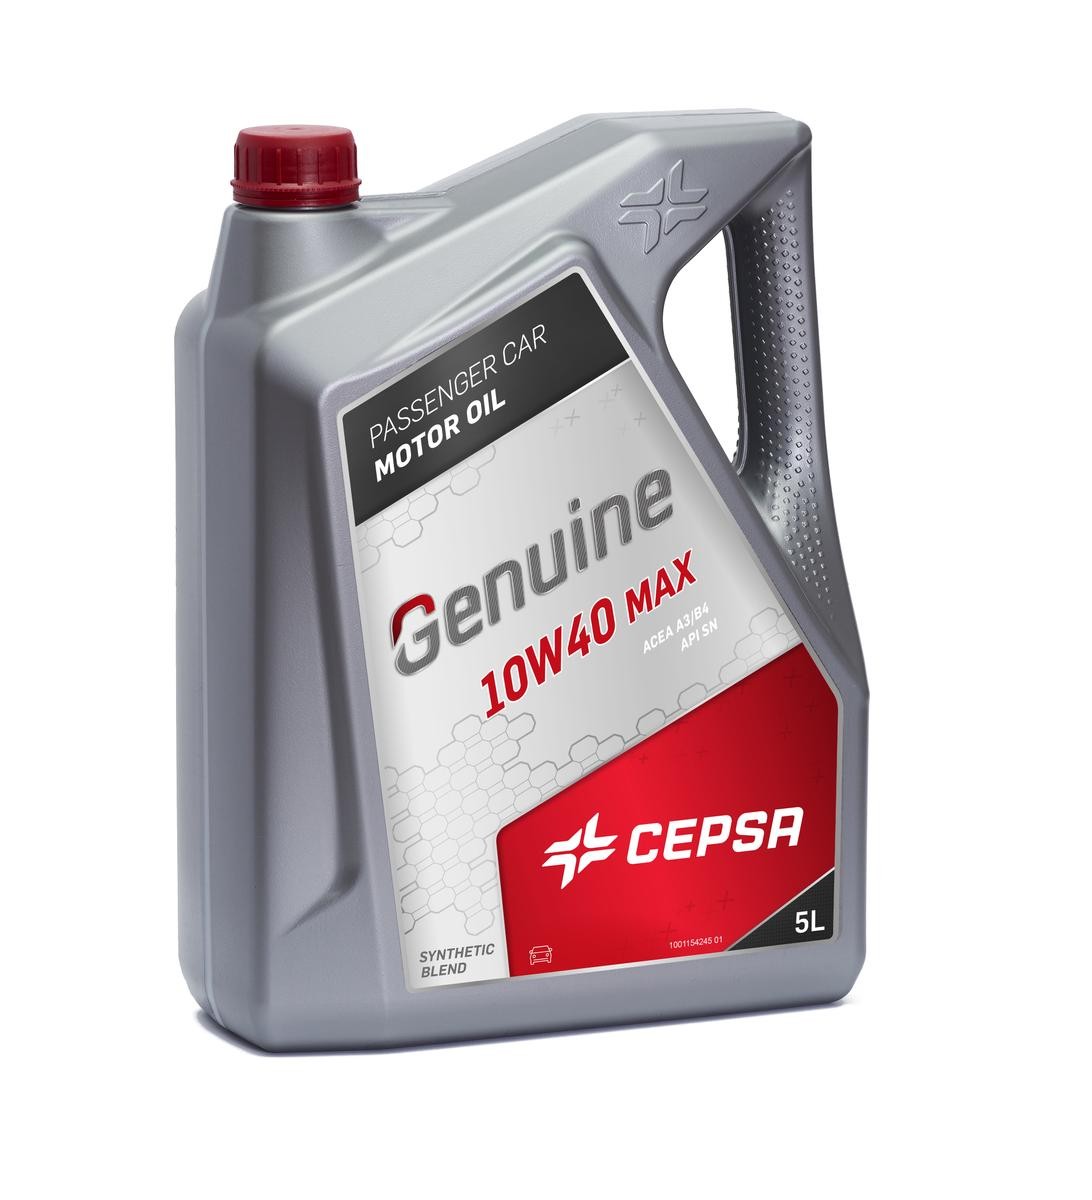 Engine oil CEPSA 10W-40, 5l, Part Synthetic Oil, Part Synthetic Oil longlife 513713090